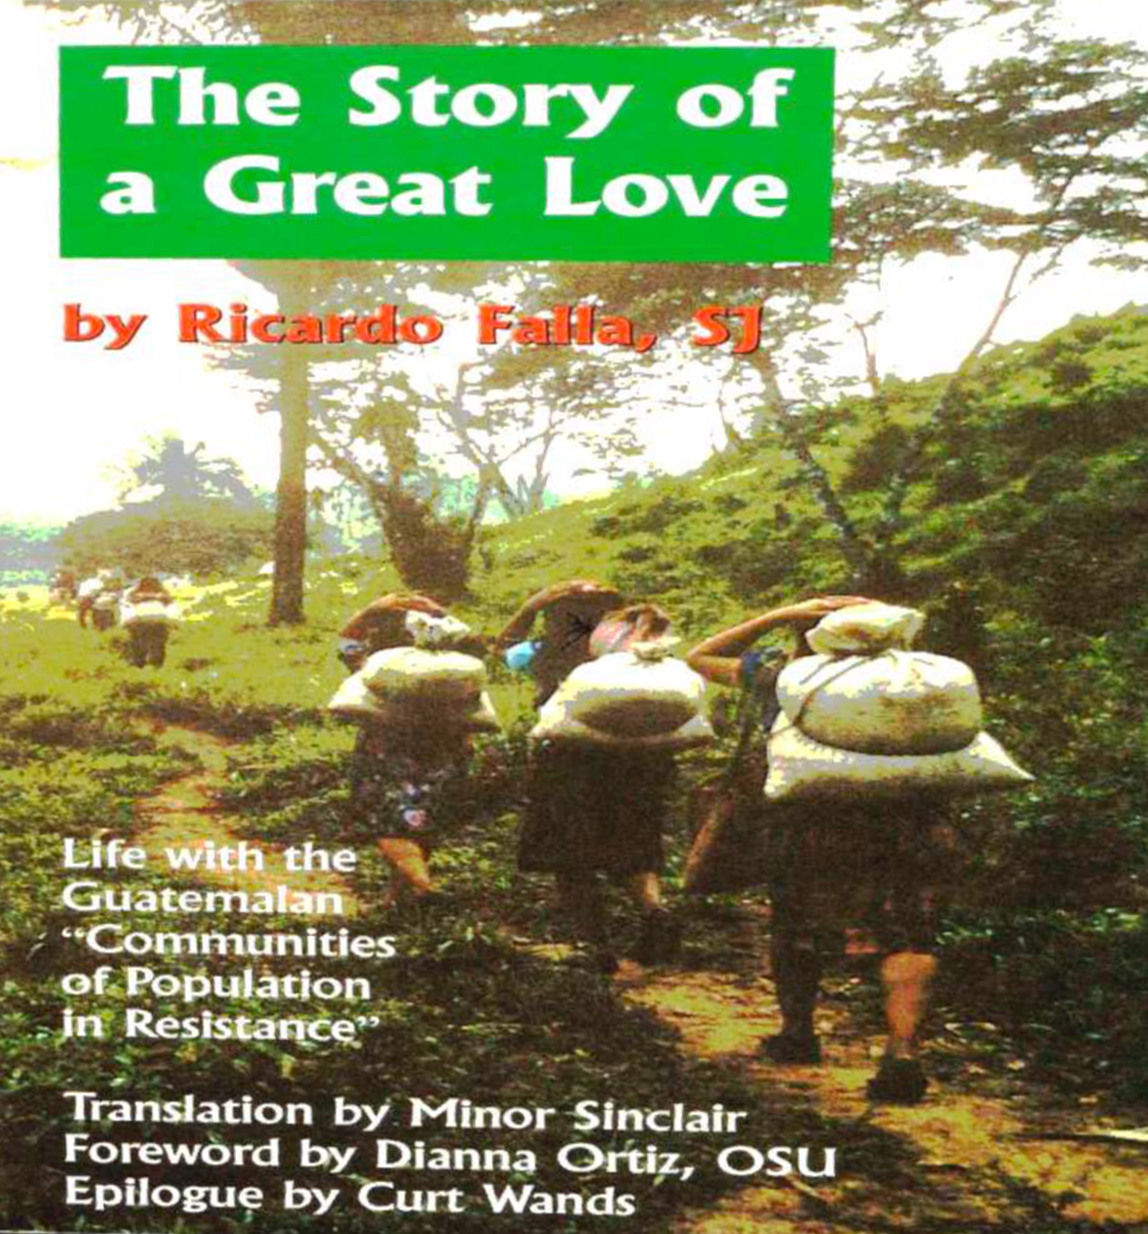 The Story of a Great Love